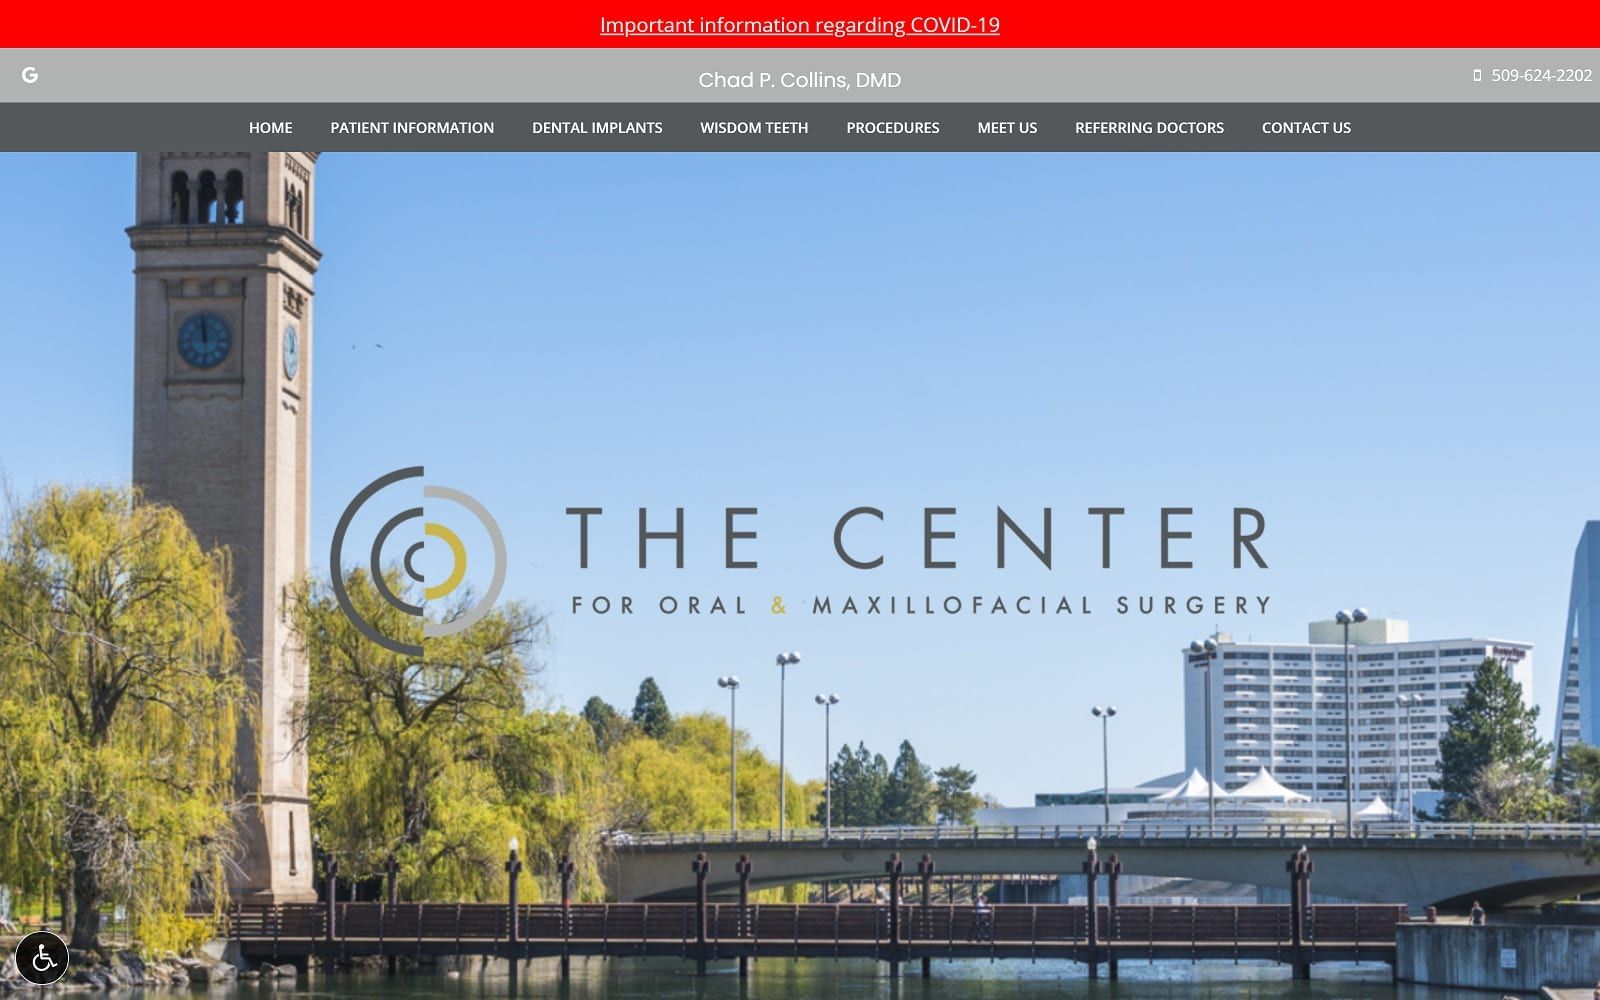 The Screenshot of Center For Oral Surgery thecenterfororalsurgery.com Dr. Chad P. Collins Website